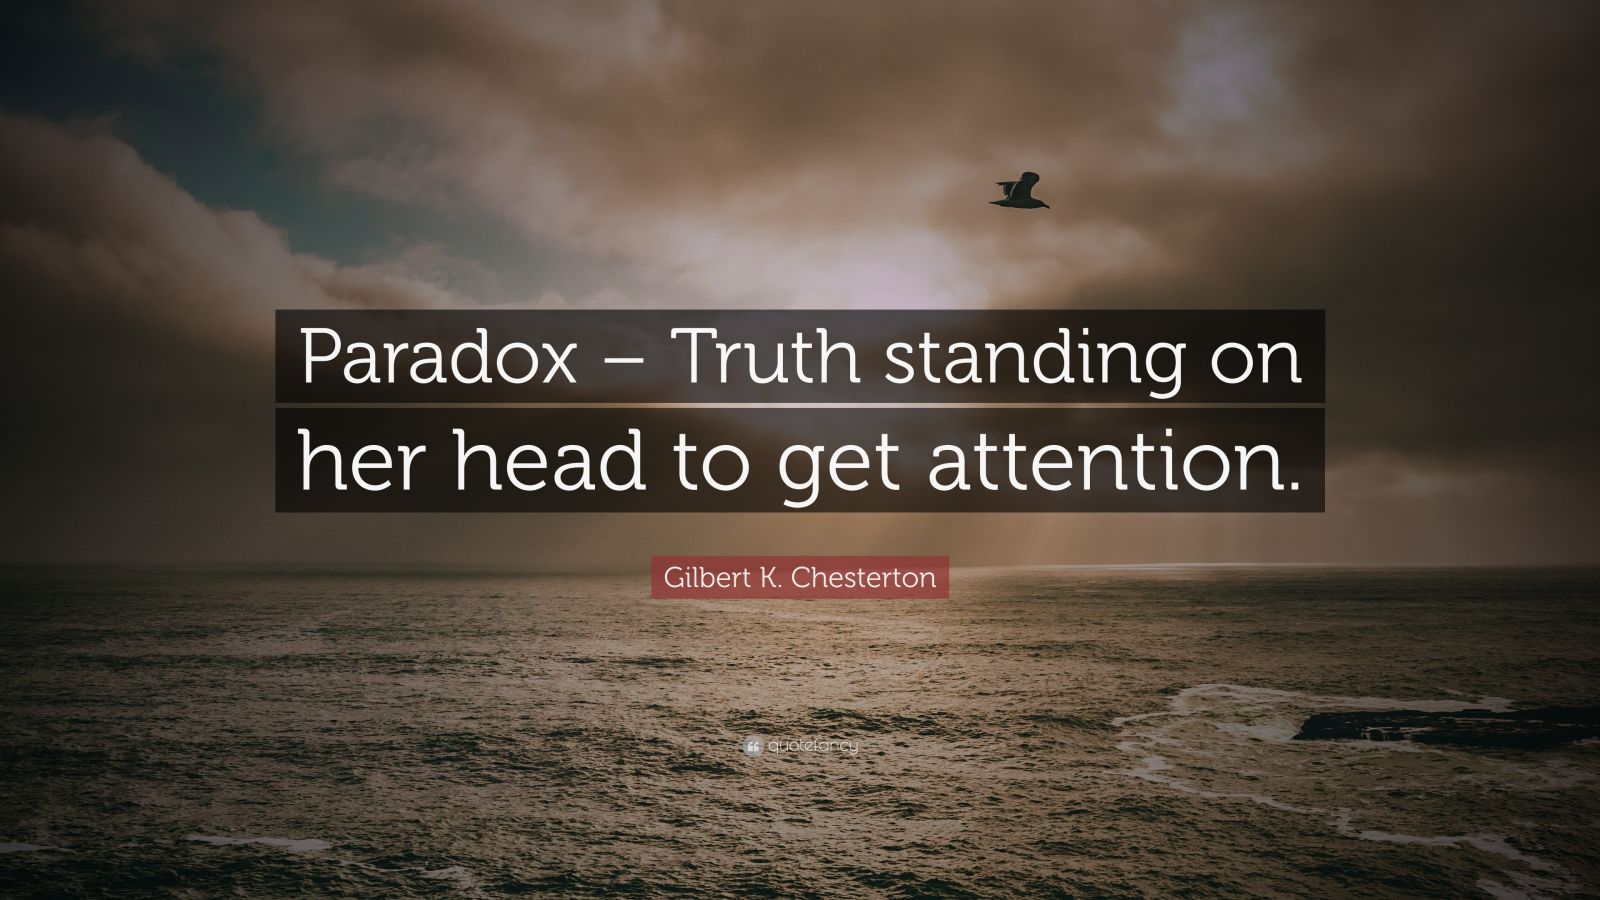 5046442 Gilbert K Chesterton Quote Paradox Truth standing on her head to